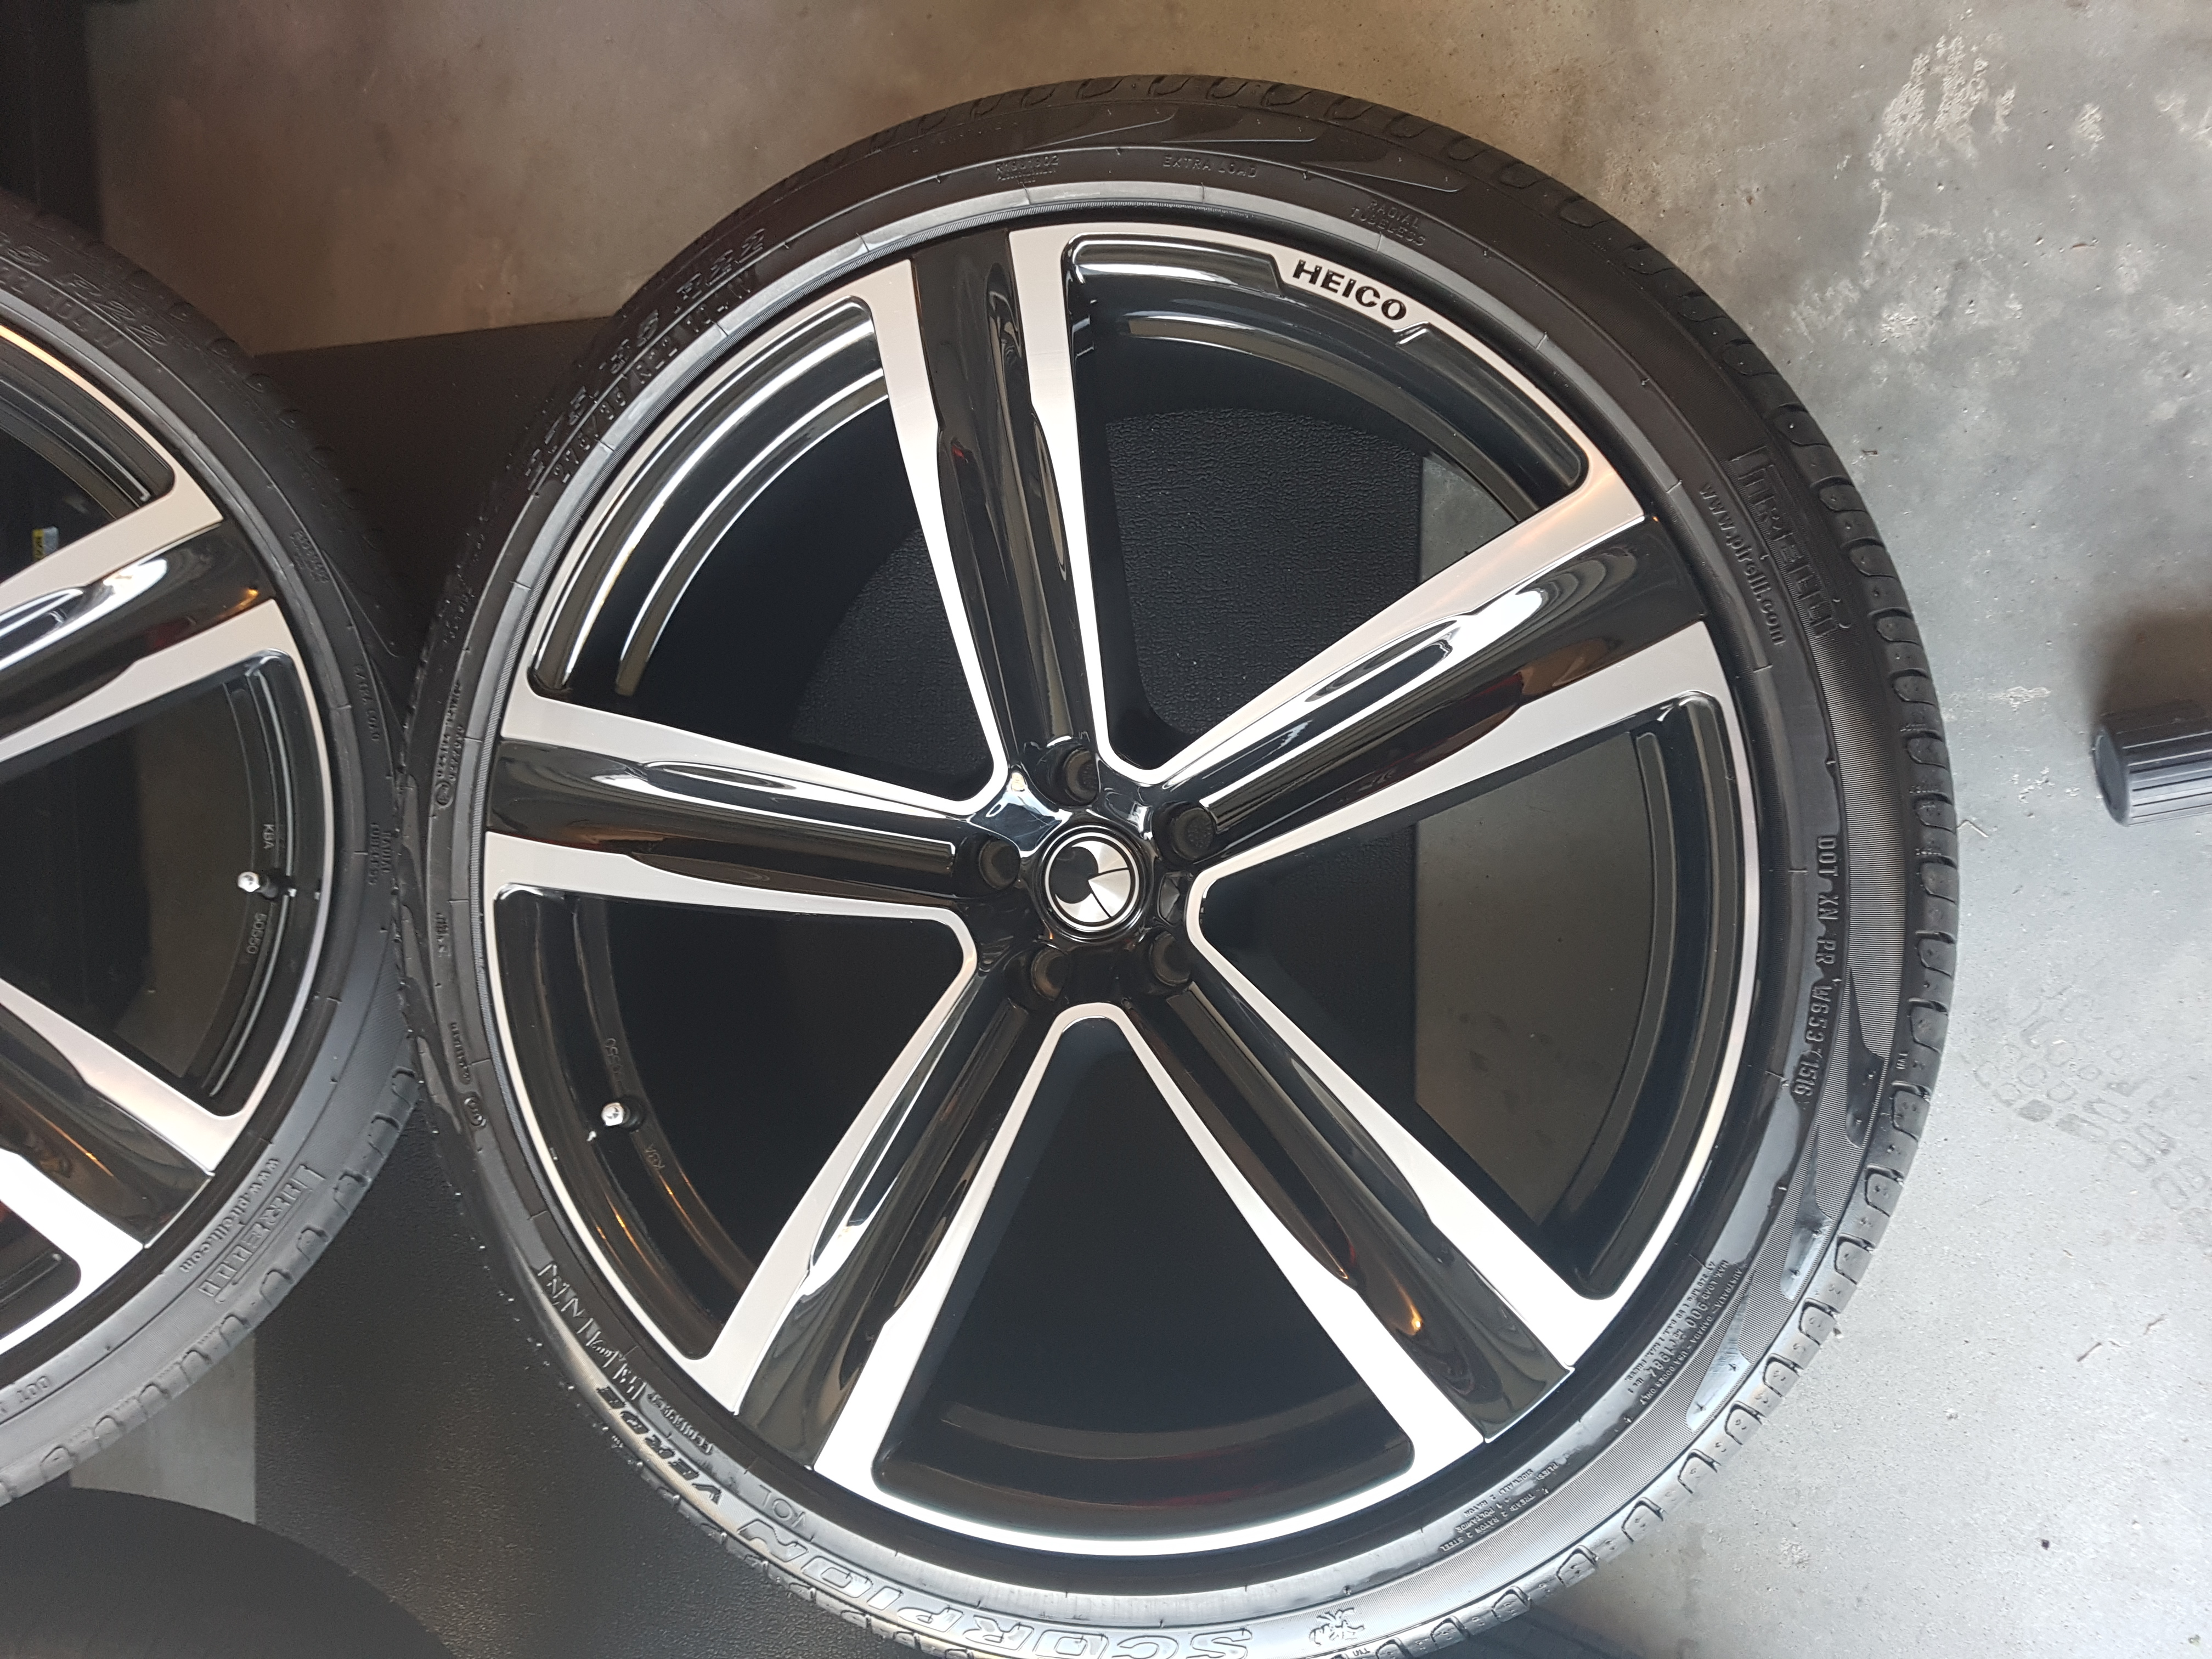 Anyone interested? Selling 22" Heico Rims for Volvo XC90 Volvo